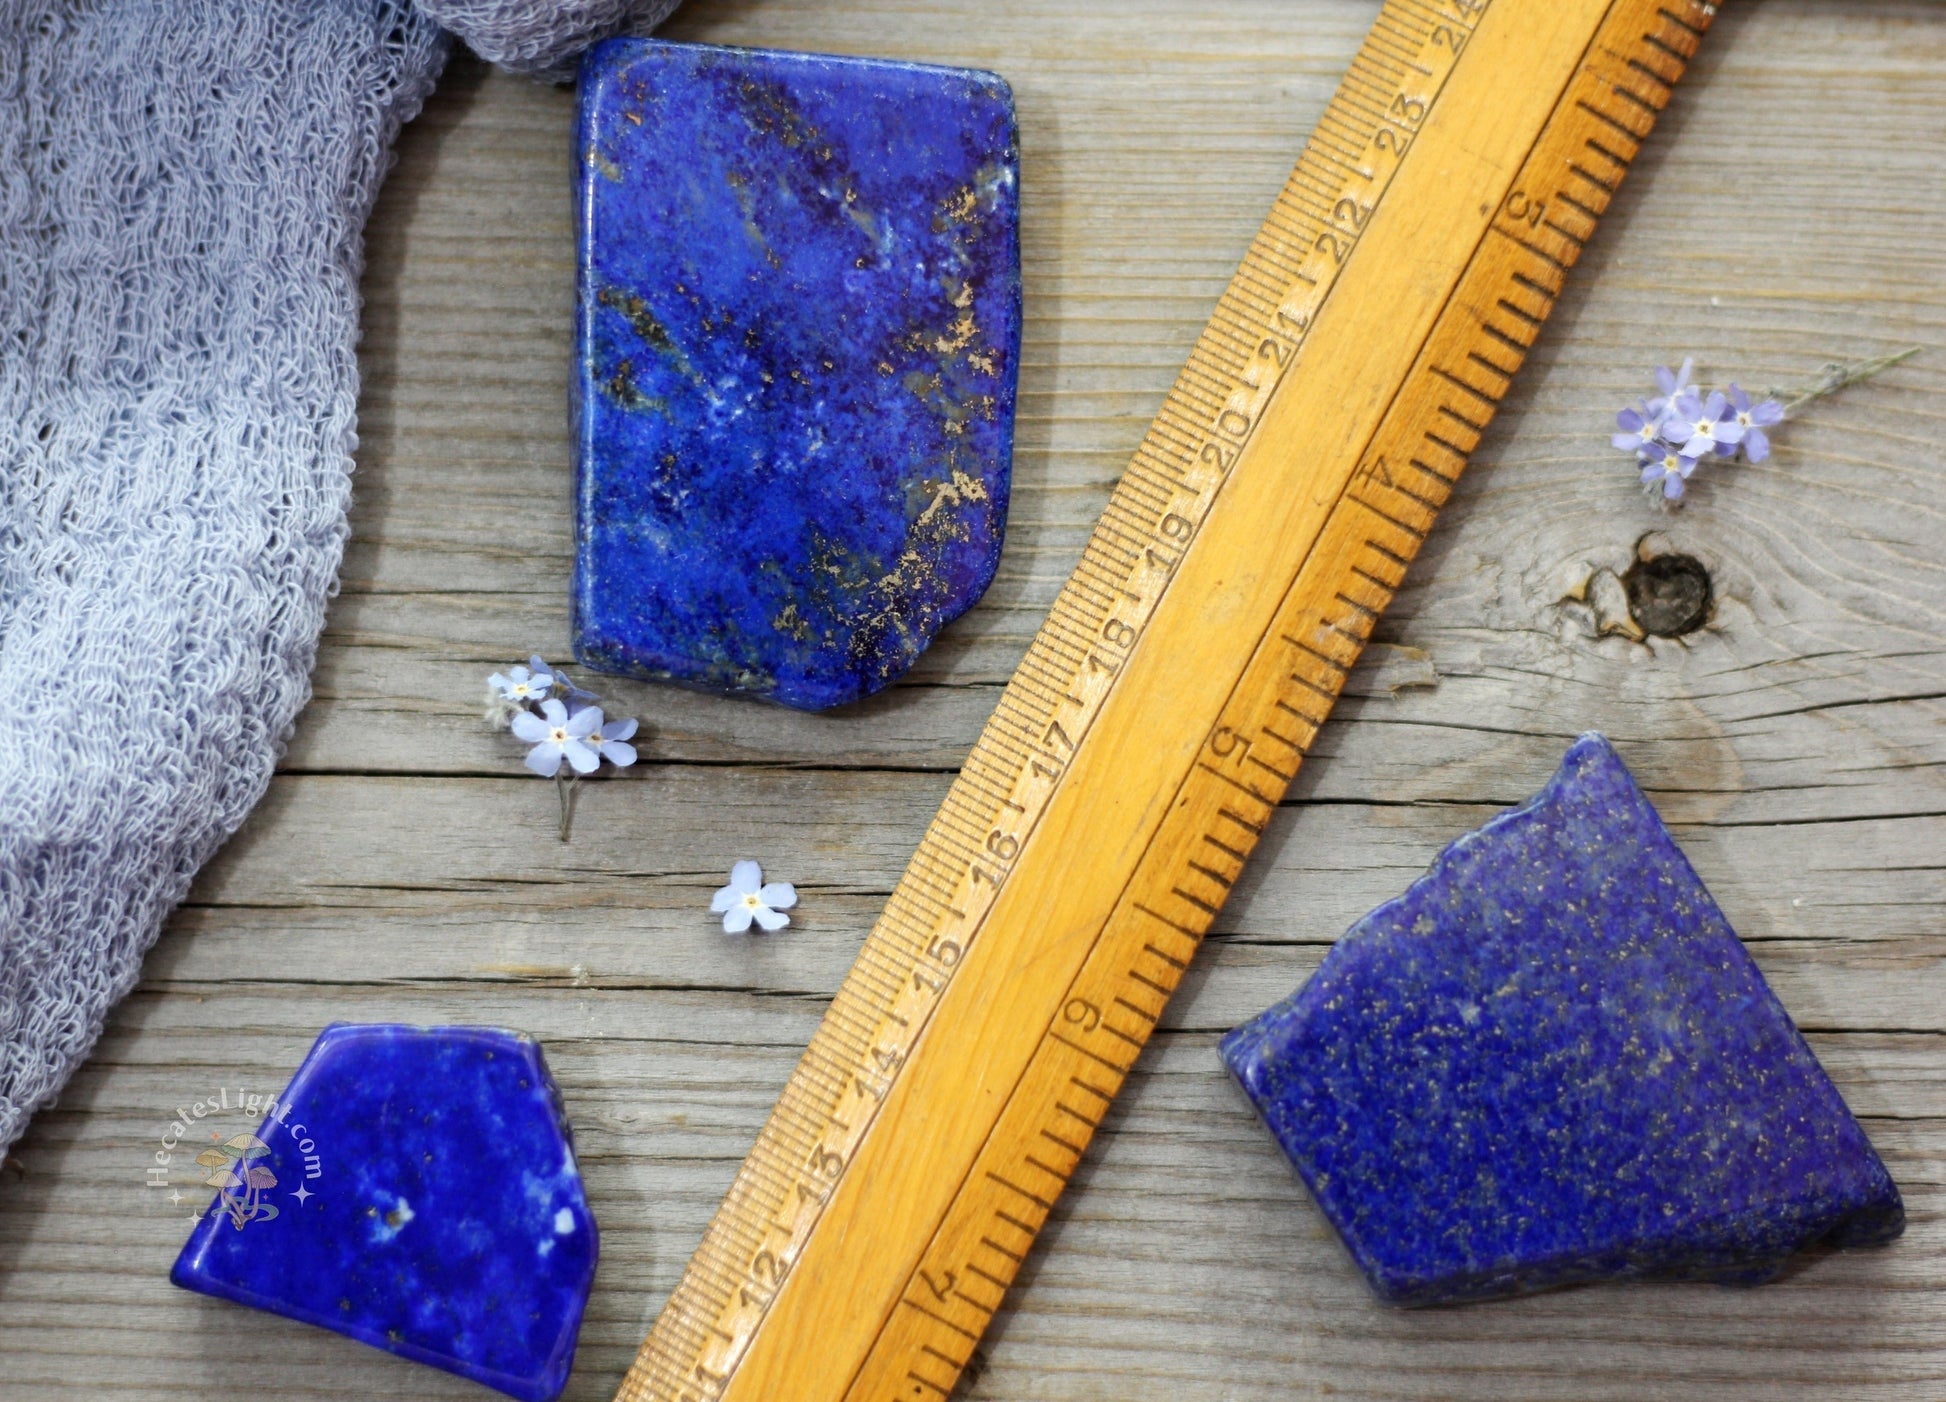 Lapis Lazuli Slabs Hecate's Light crystal, crystals, slabs Lapis Lazuli Slabs Hecate's Light crystal, crystals, slabs Lapis Lazuli Hecate's Light crystal, crystals metaphysical occult supplies witchy hecateslight.com witchcraft cottagecore witch gifts metaphysical occult supplies witchy hecateslight.com witchcraft cottagecore witch gifts metaphysical occult supplies witchy hecateslight.com witchcraft cottagecore witch gifts